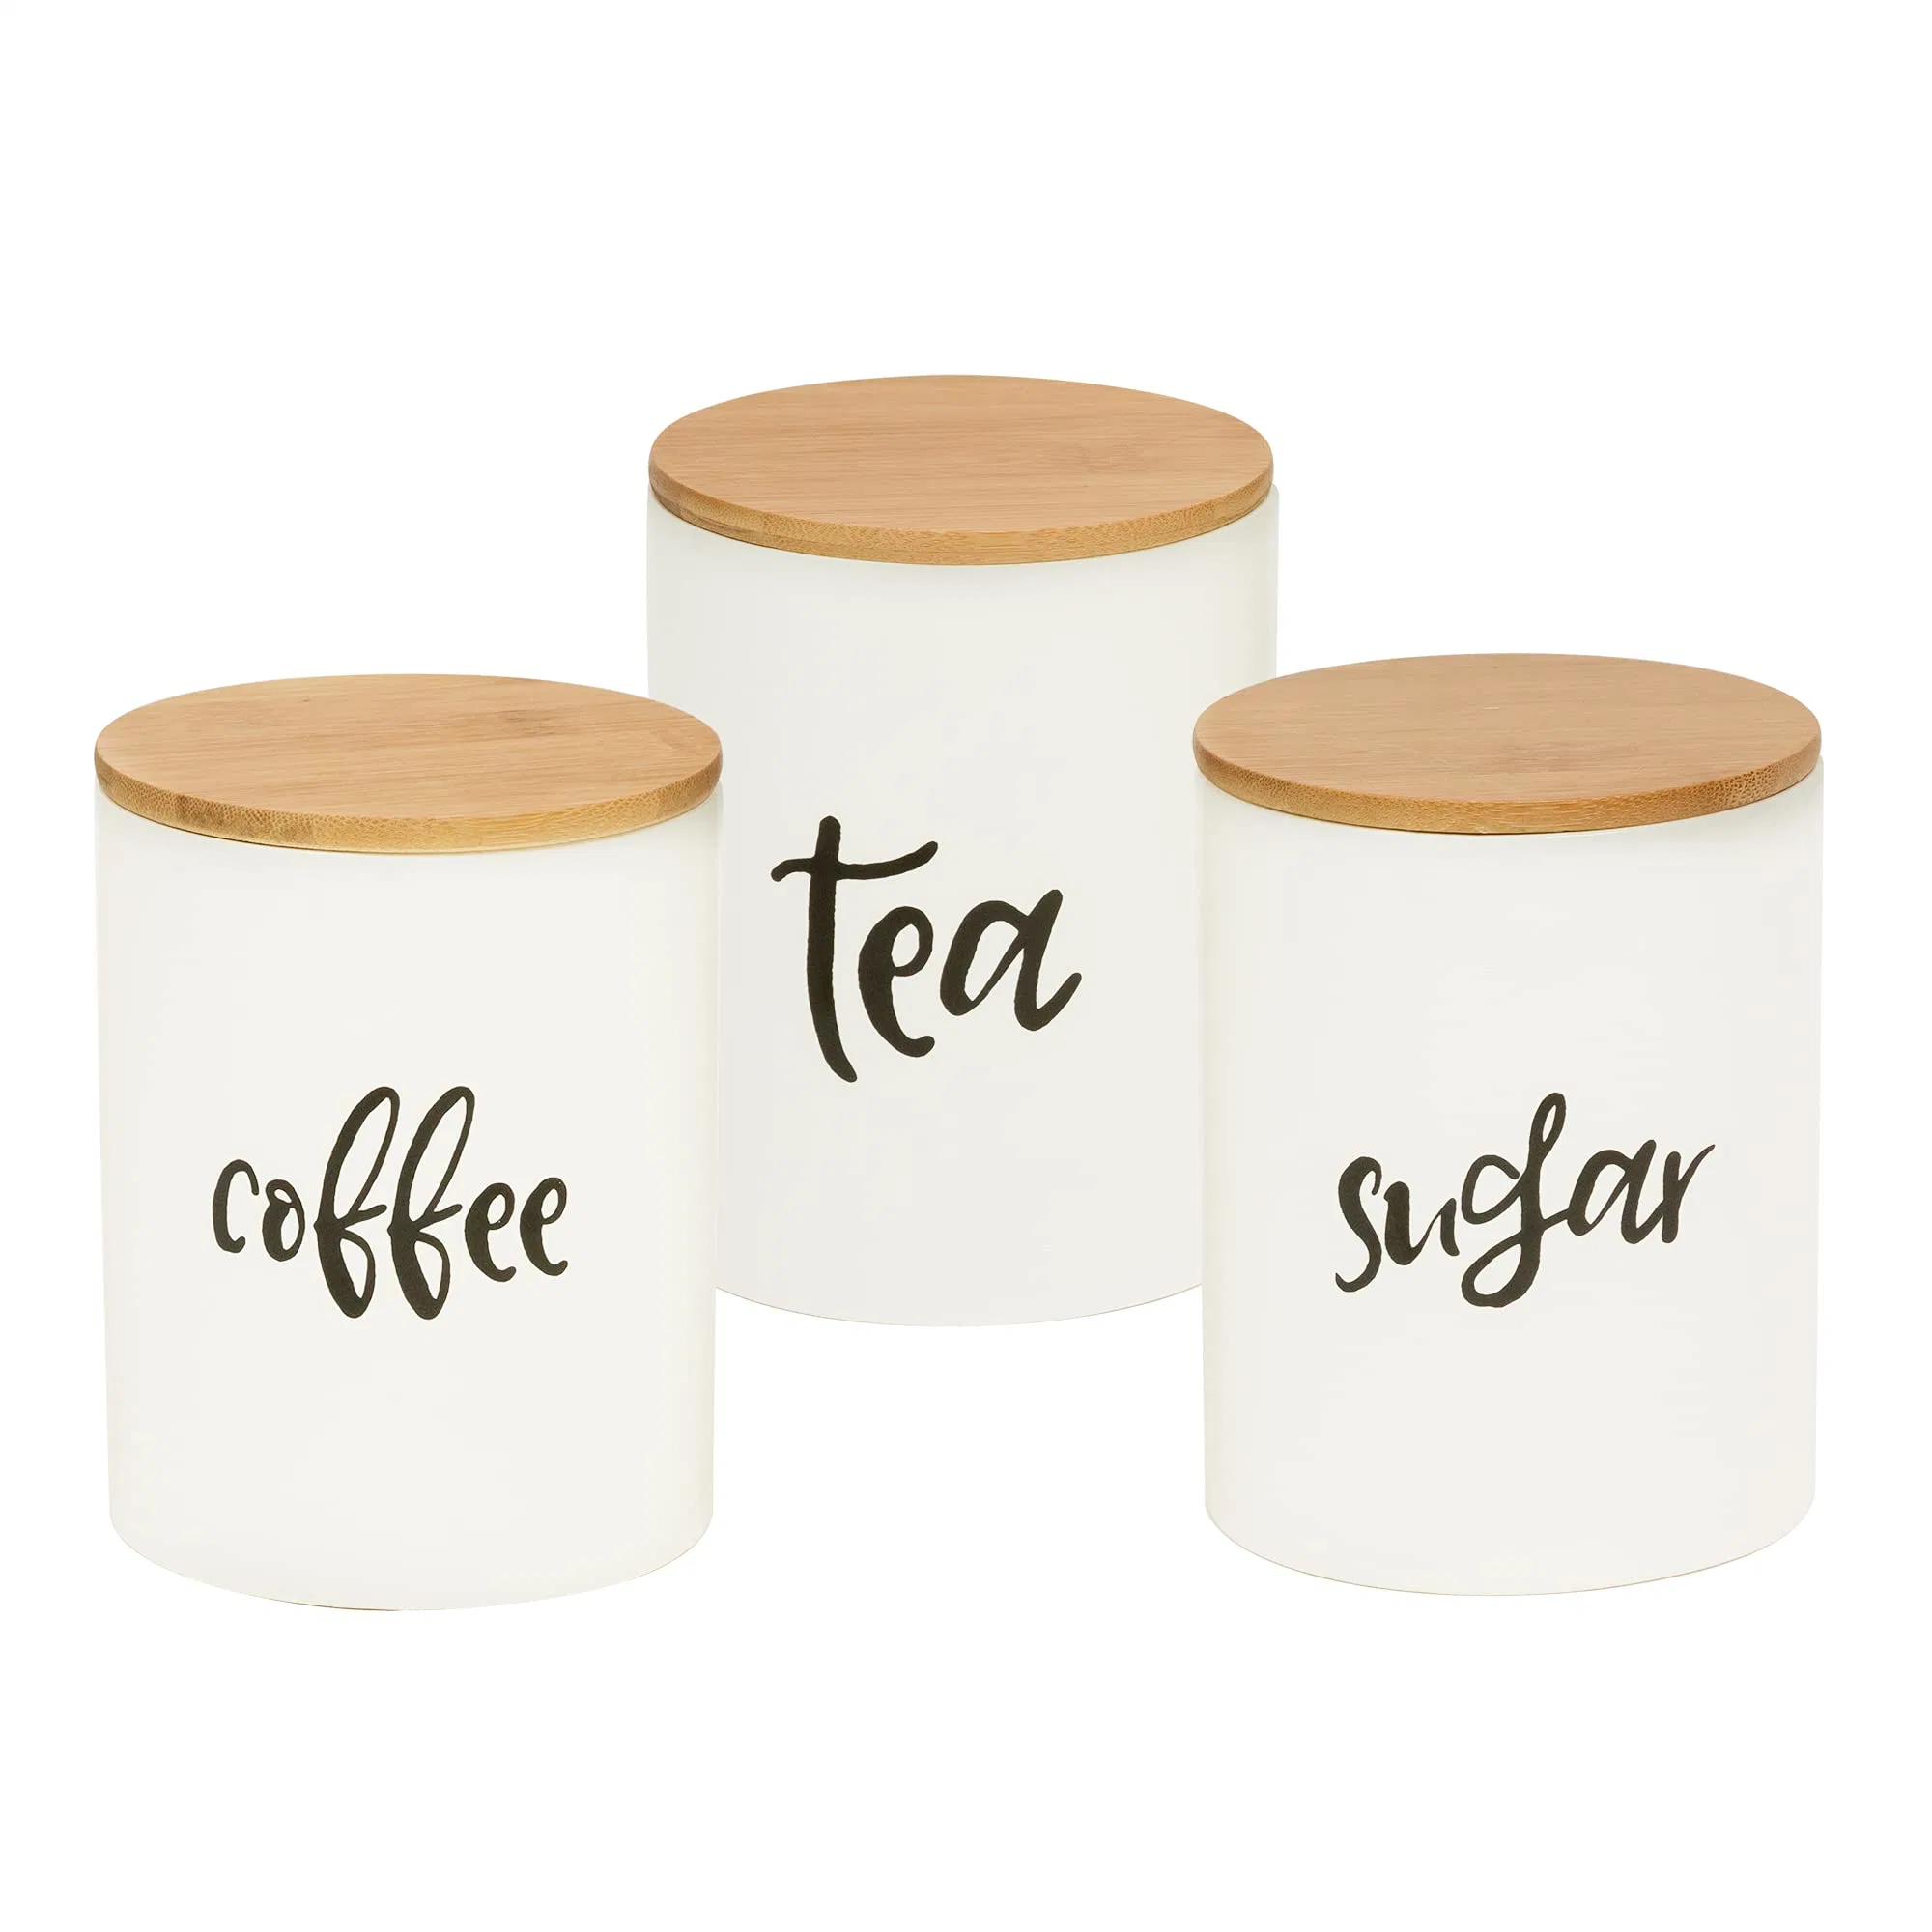 Kitchen Food Storage Ceramic Canister, Airtight Ceramic Canisters with Bamboo Lid, for Coffee, Sugar, Tea Storage Containers